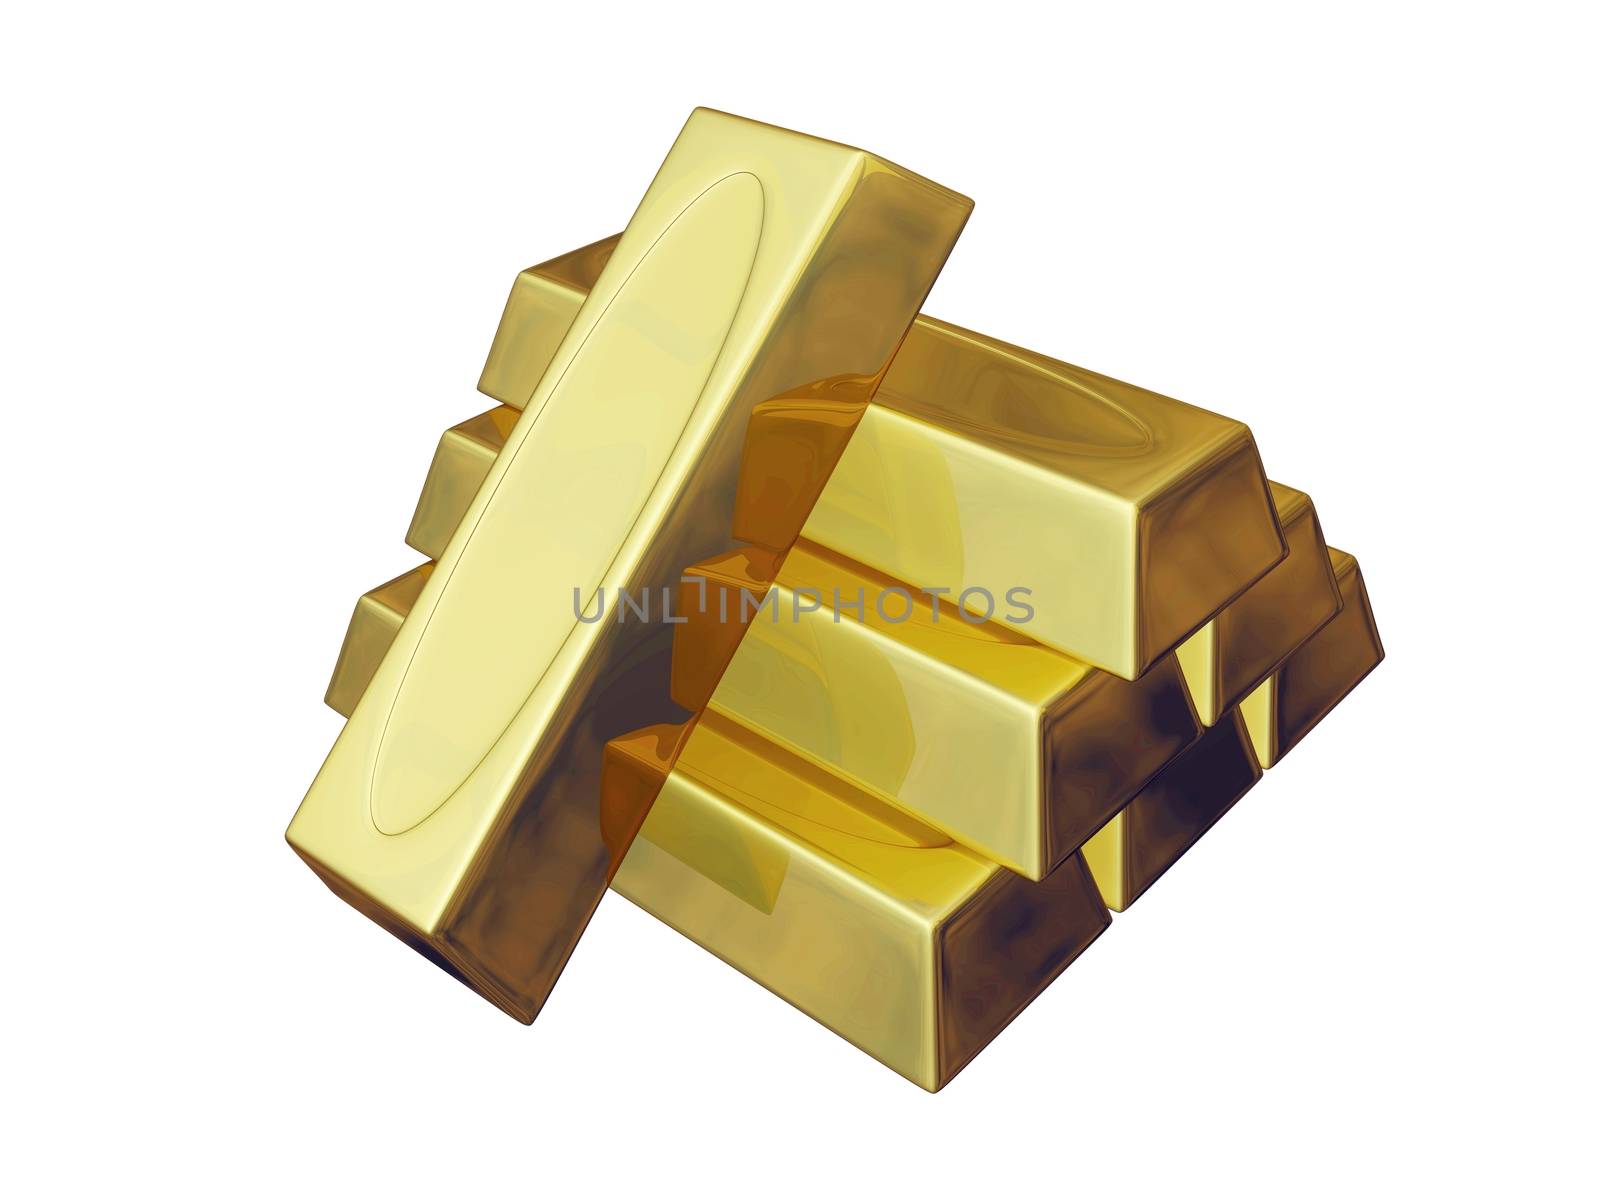 A pyramid stack of gold bars and one extra bar. The image will find use in financial, wealth building, and bullion trading concepts.
